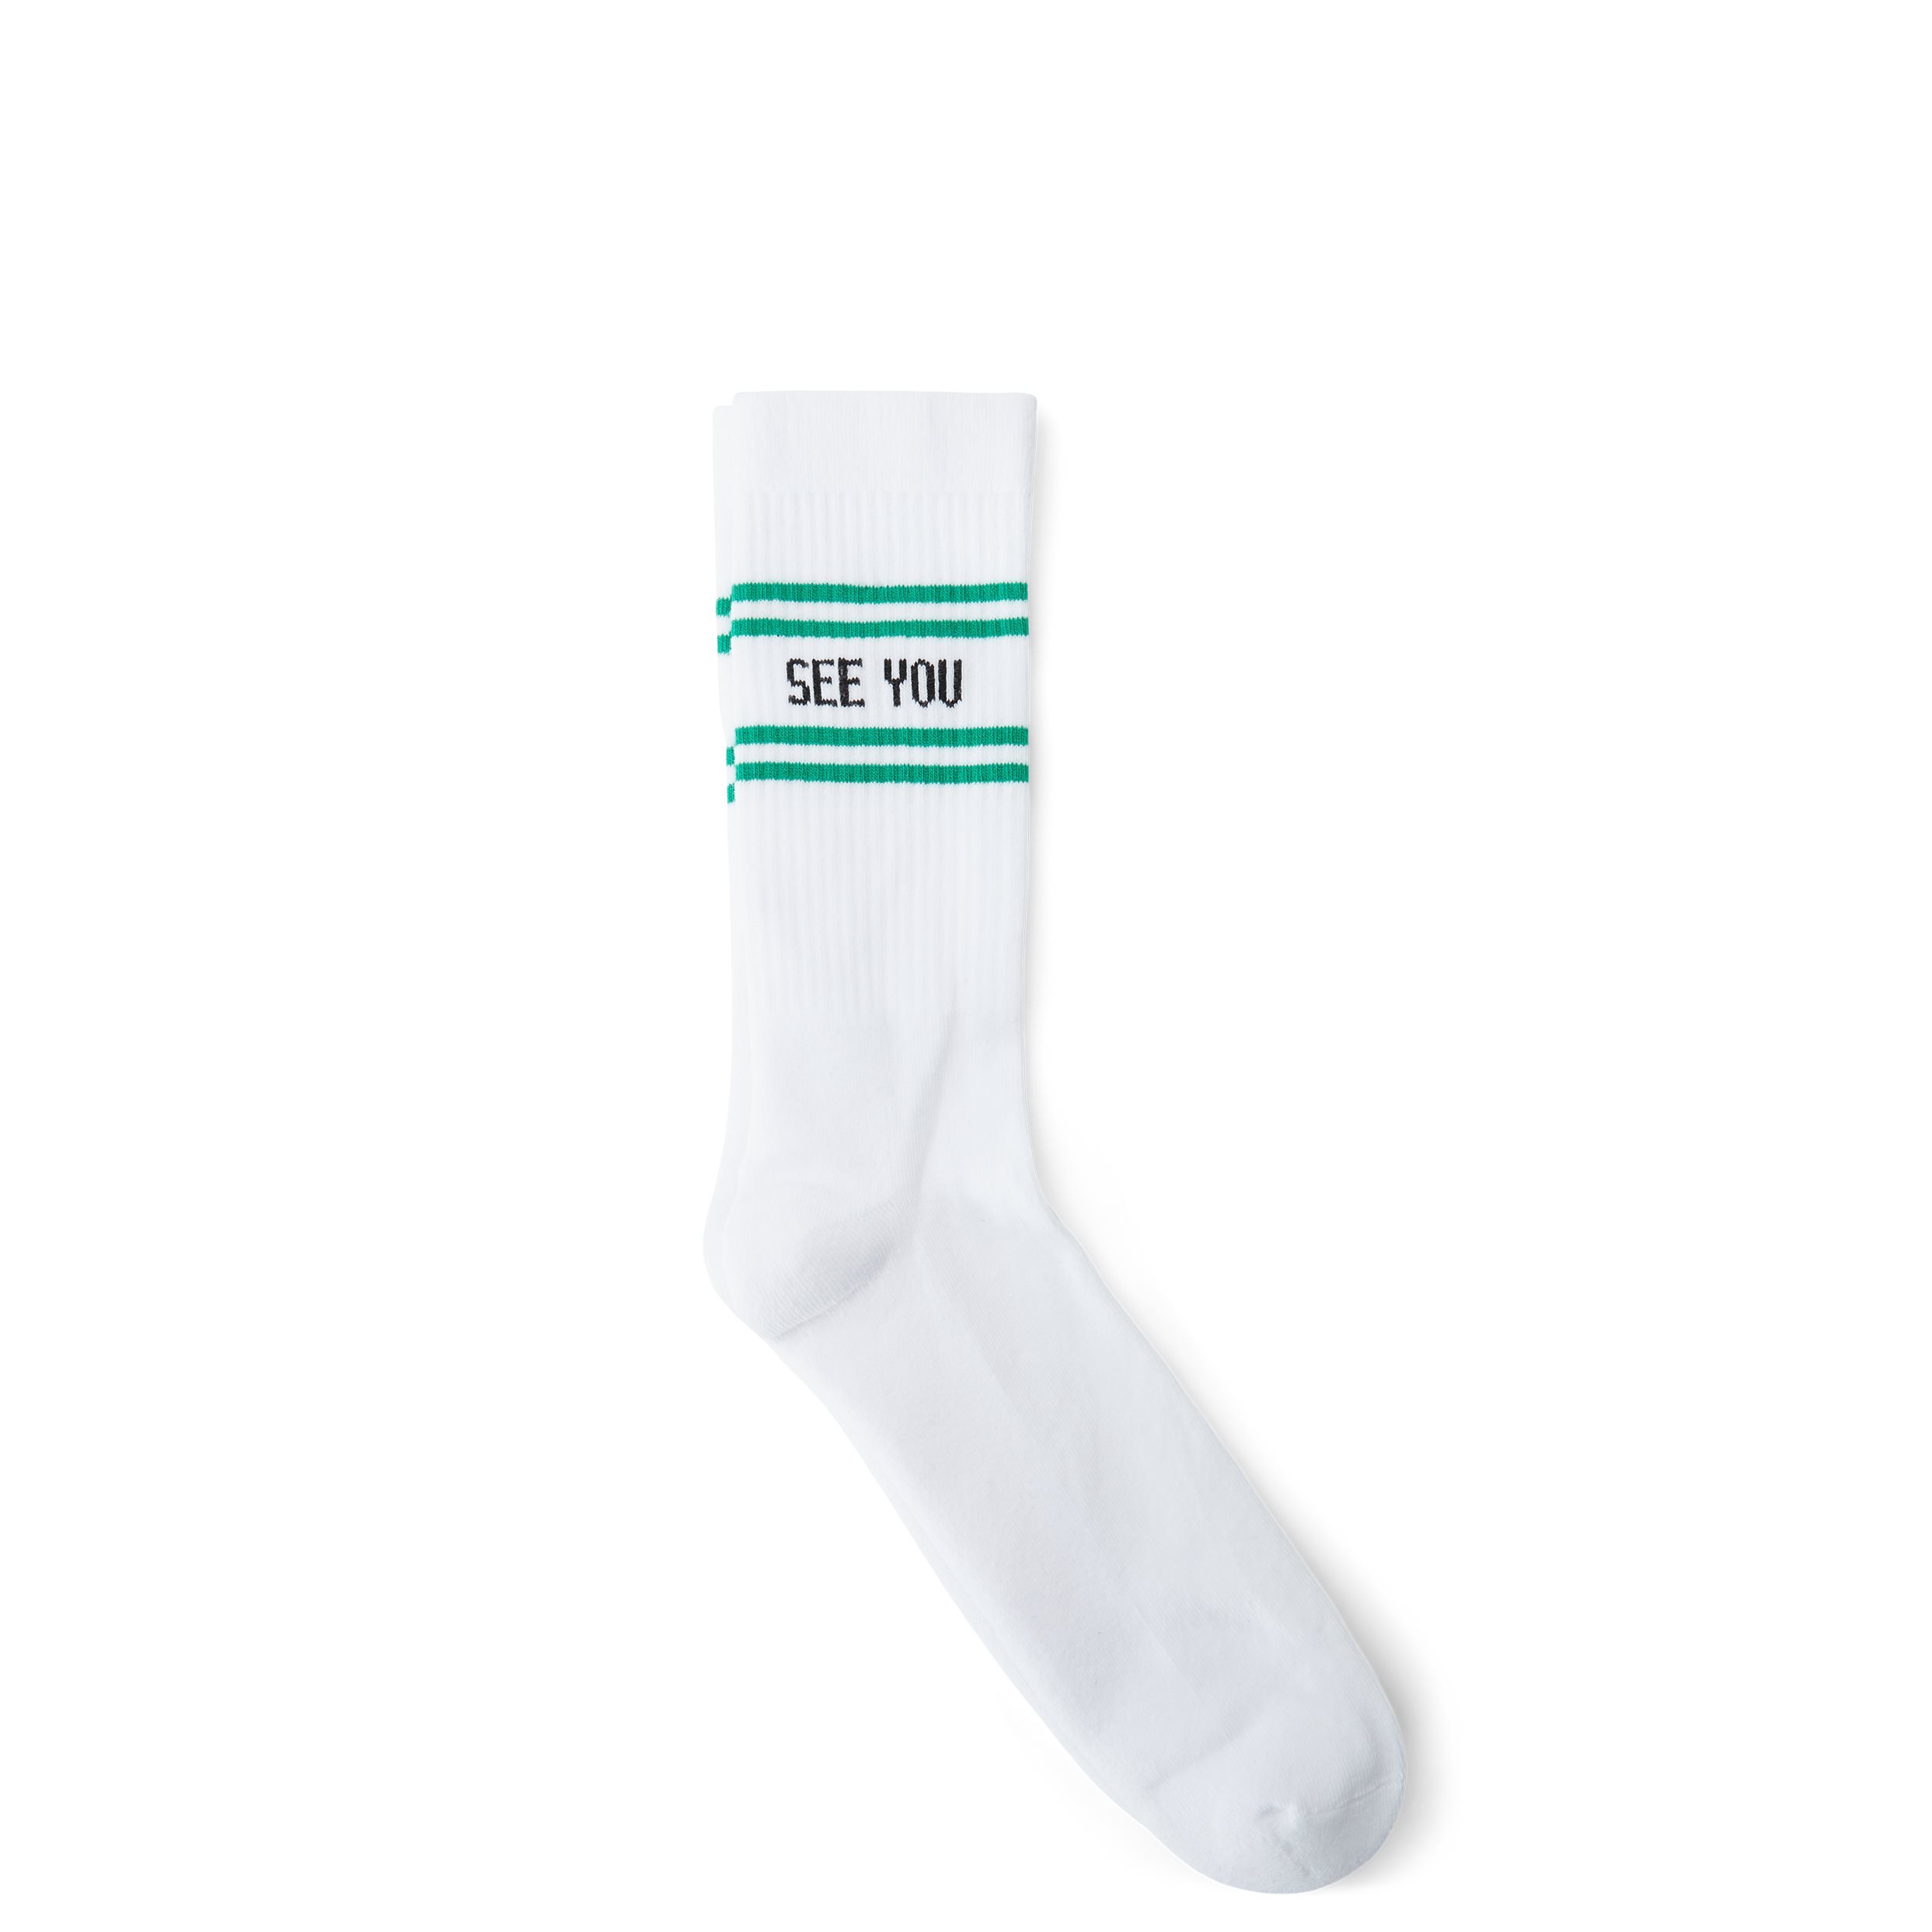 qUINT Socks SEE YOU 115-12527 White